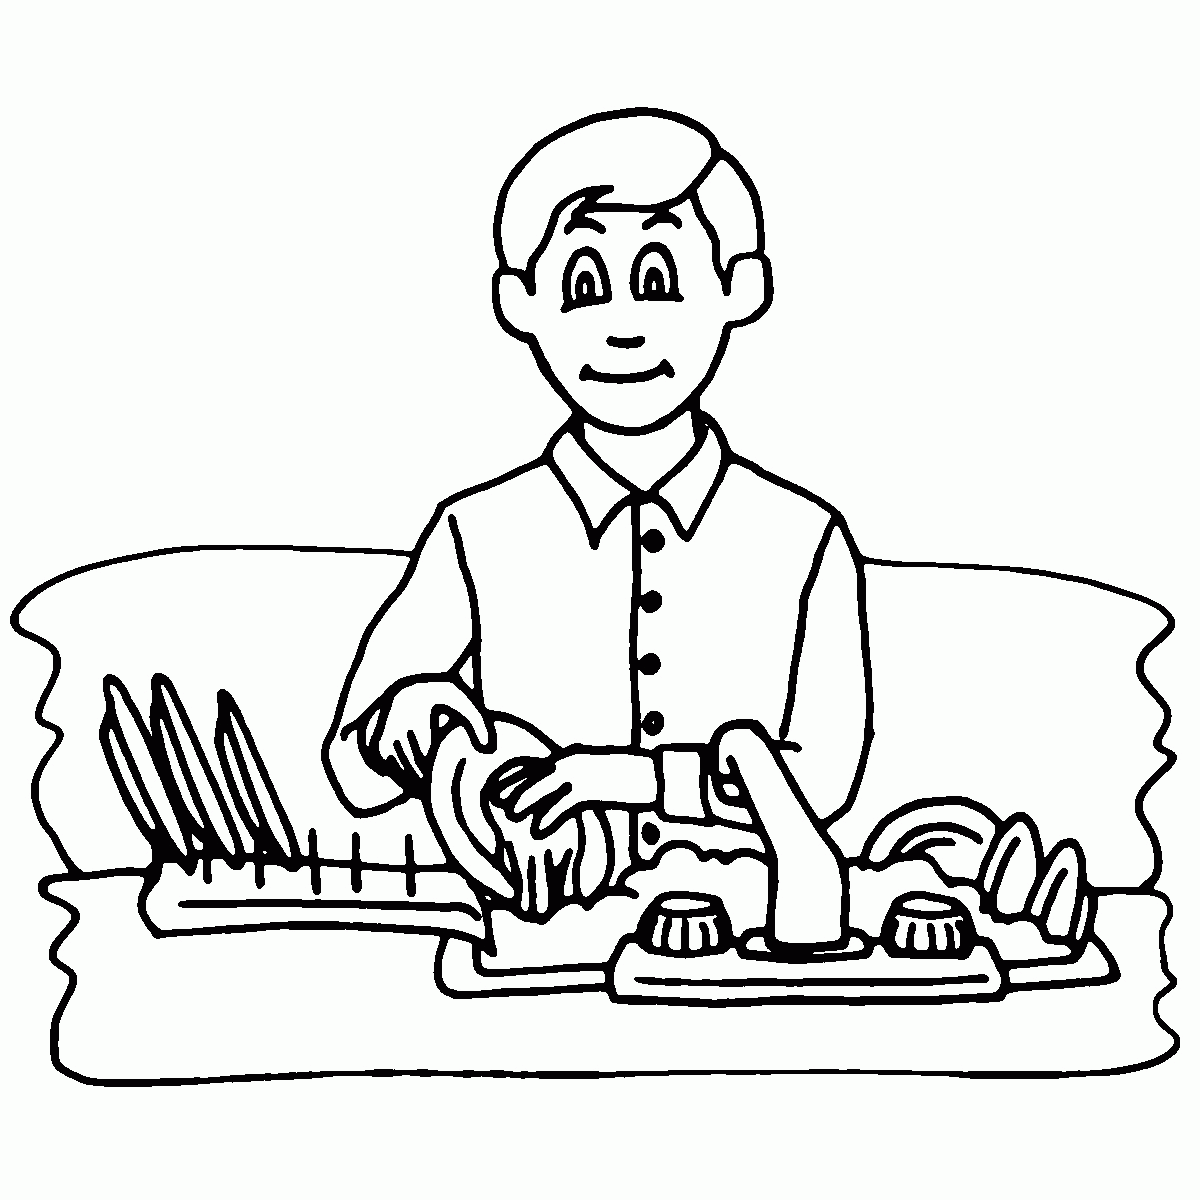 Coloring Pages, Kids Doing Chores - Coloring Home